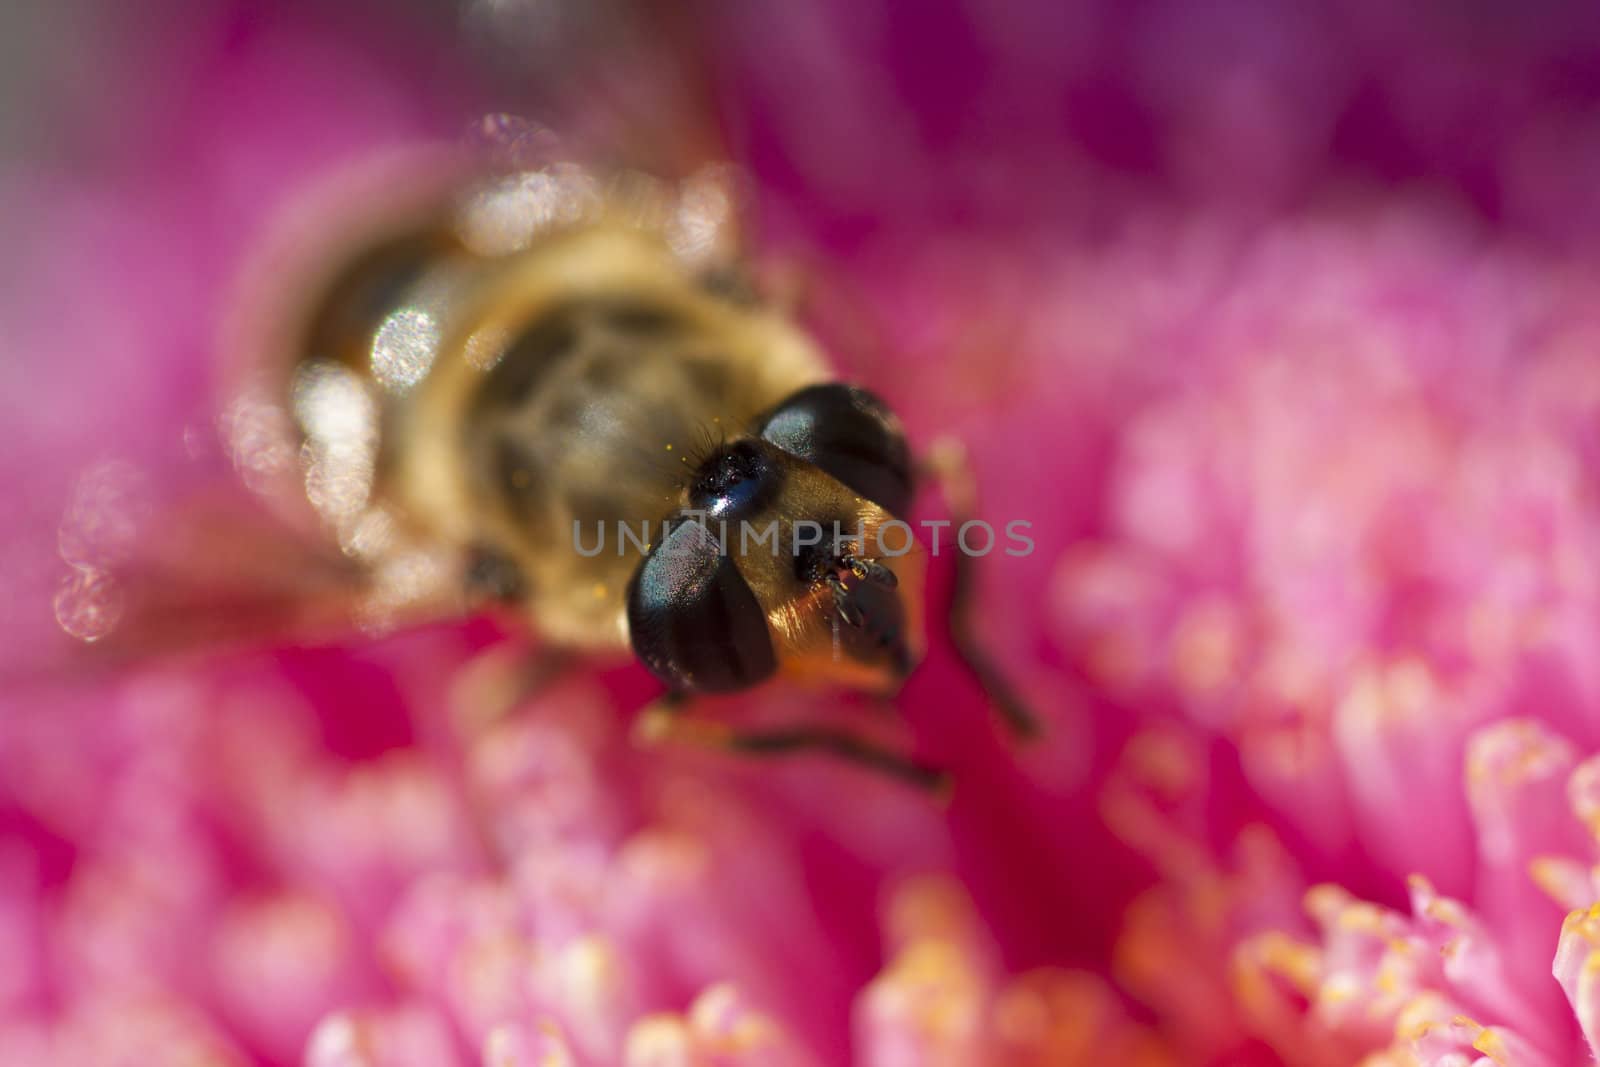 striped fly on a bright pink flower